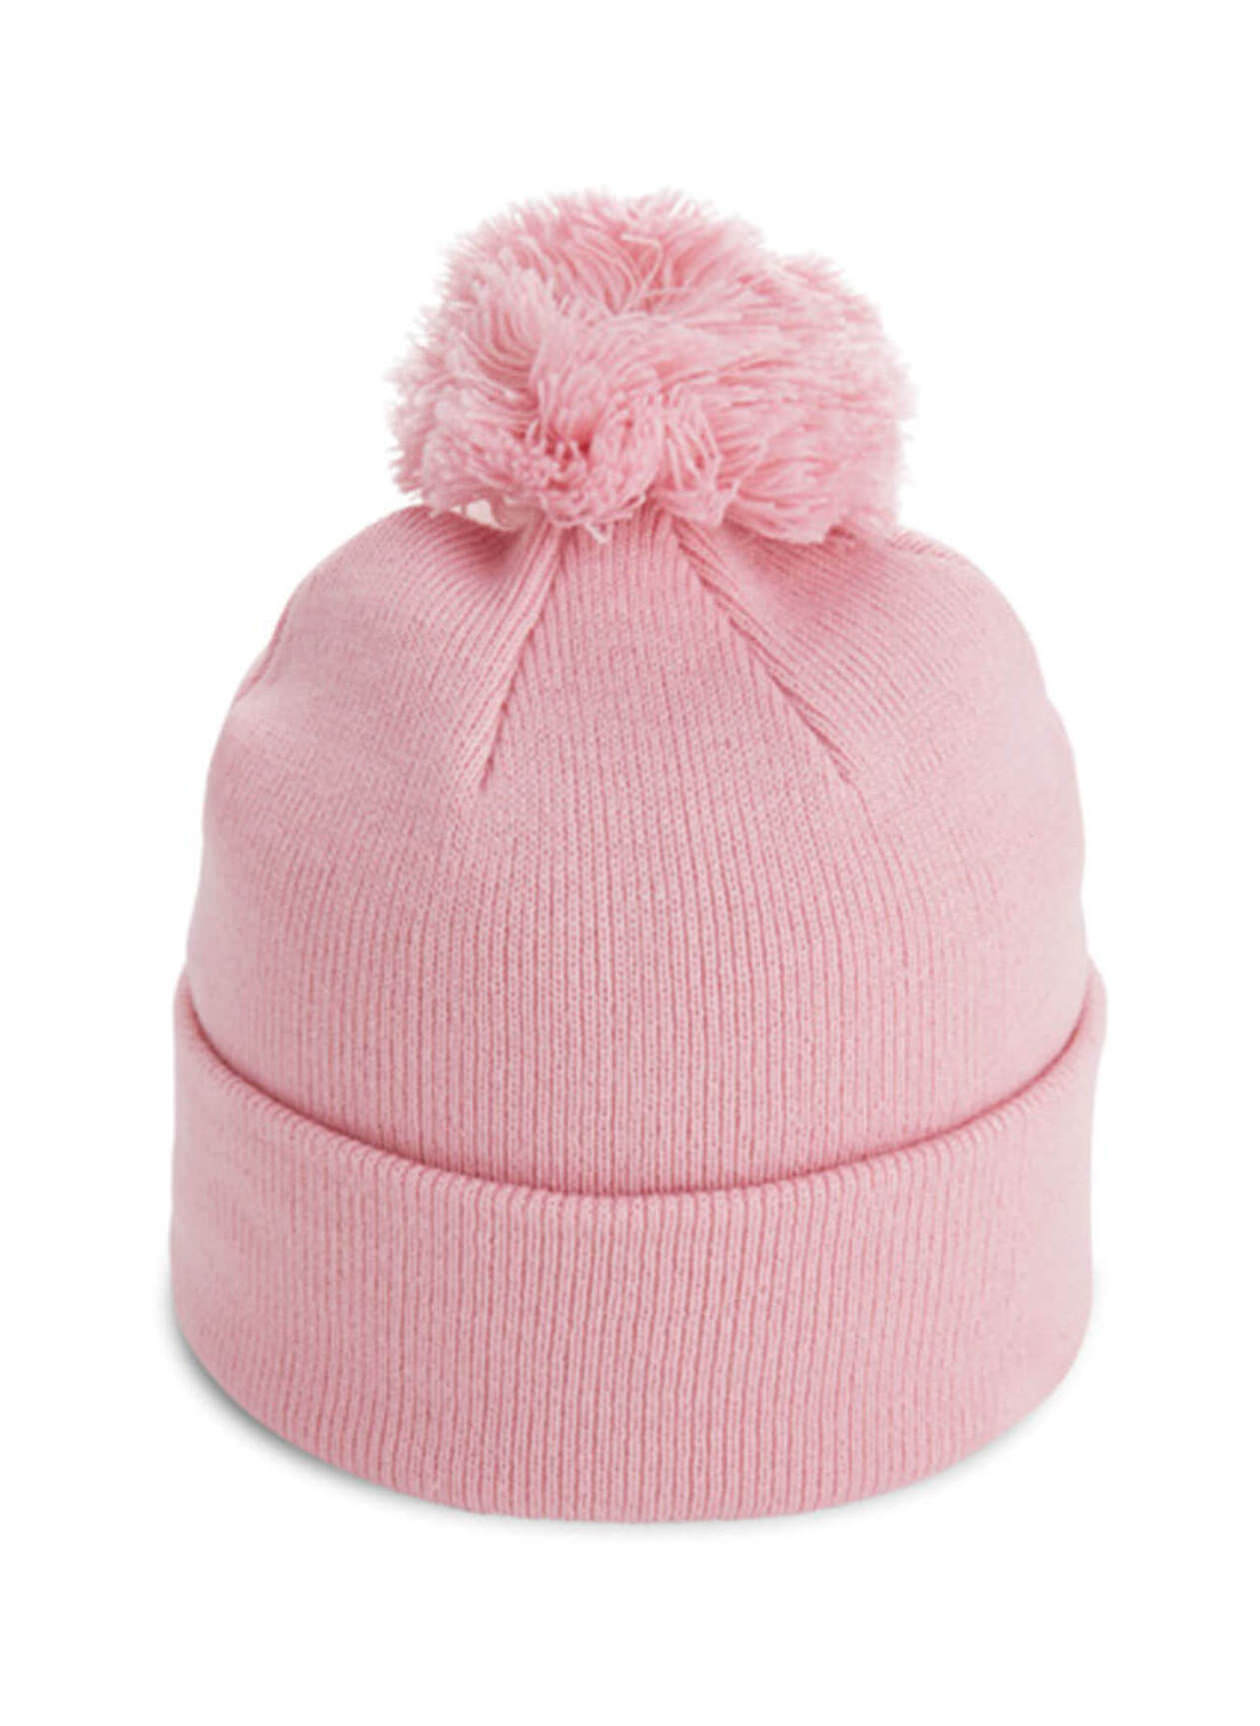 Imperial Light Pink The Tahoe Knit Beanie with Pom